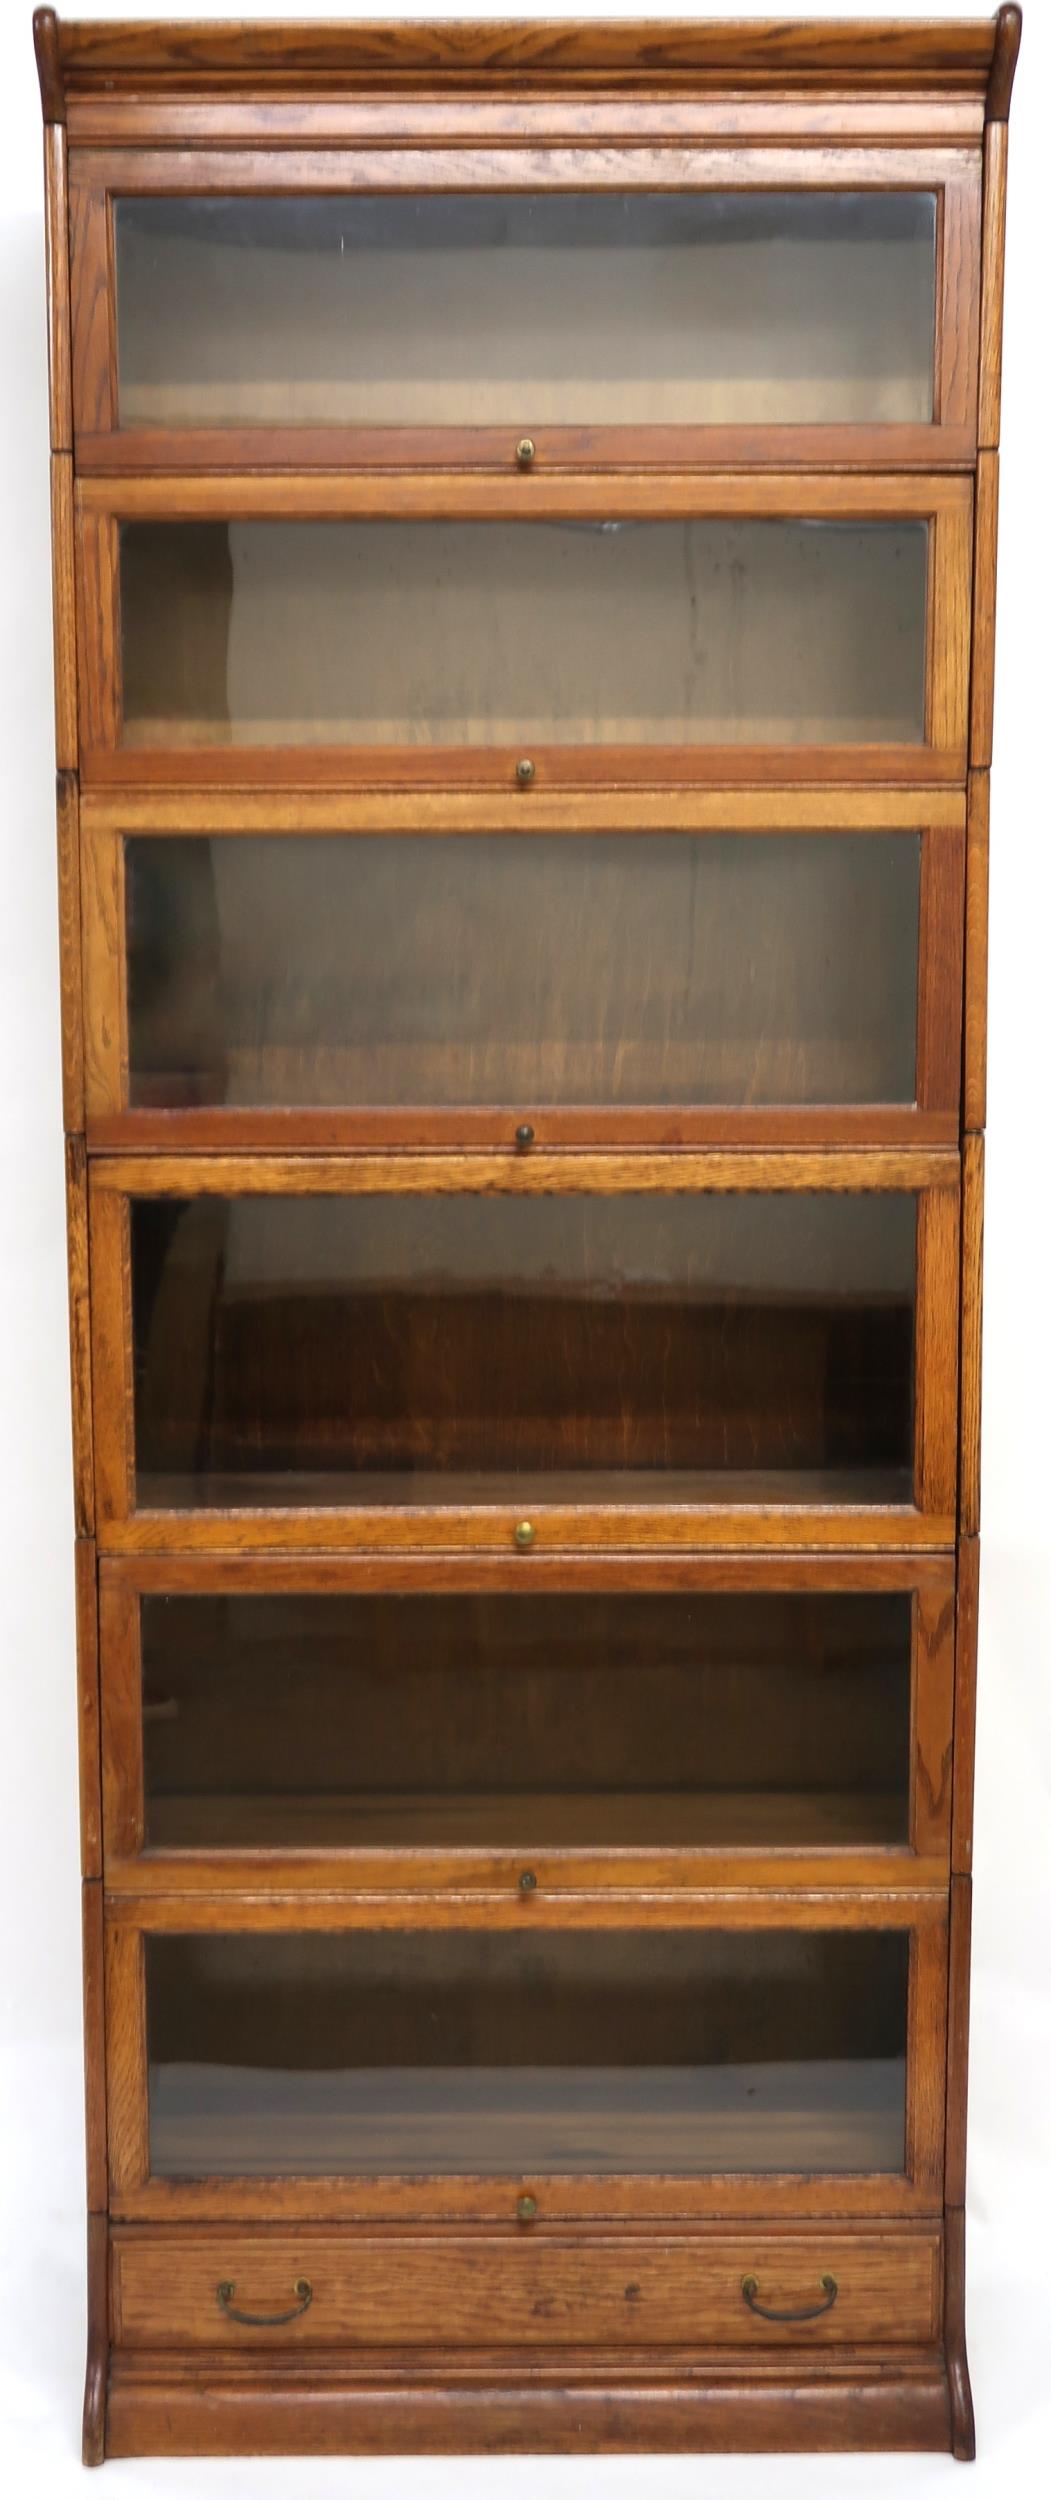 AN EARLY 20TH CENTURY OAK GLOBE-WERNICKE STYLE SIX TIER SECTIONAL BOOKCASE with six glazed doored